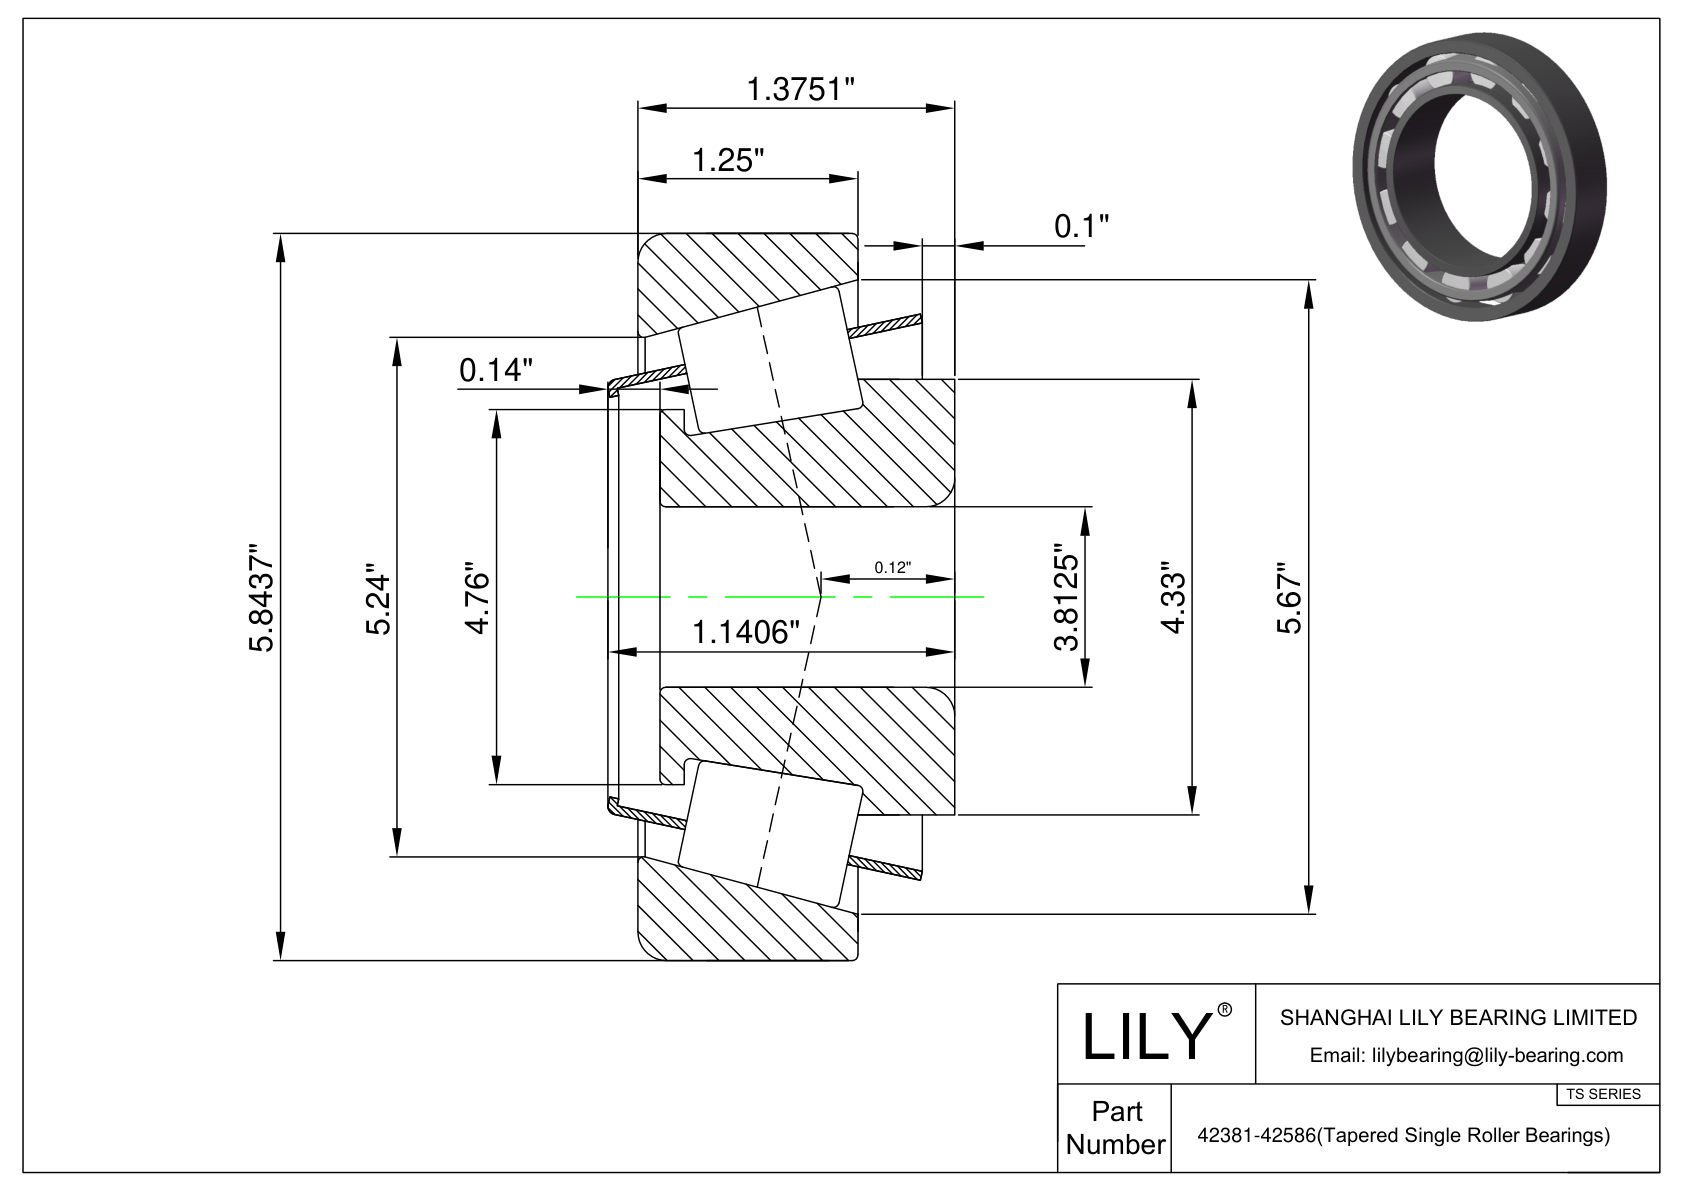 42381-42586 TS (Tapered Single Roller Bearings) (Imperial) cad drawing